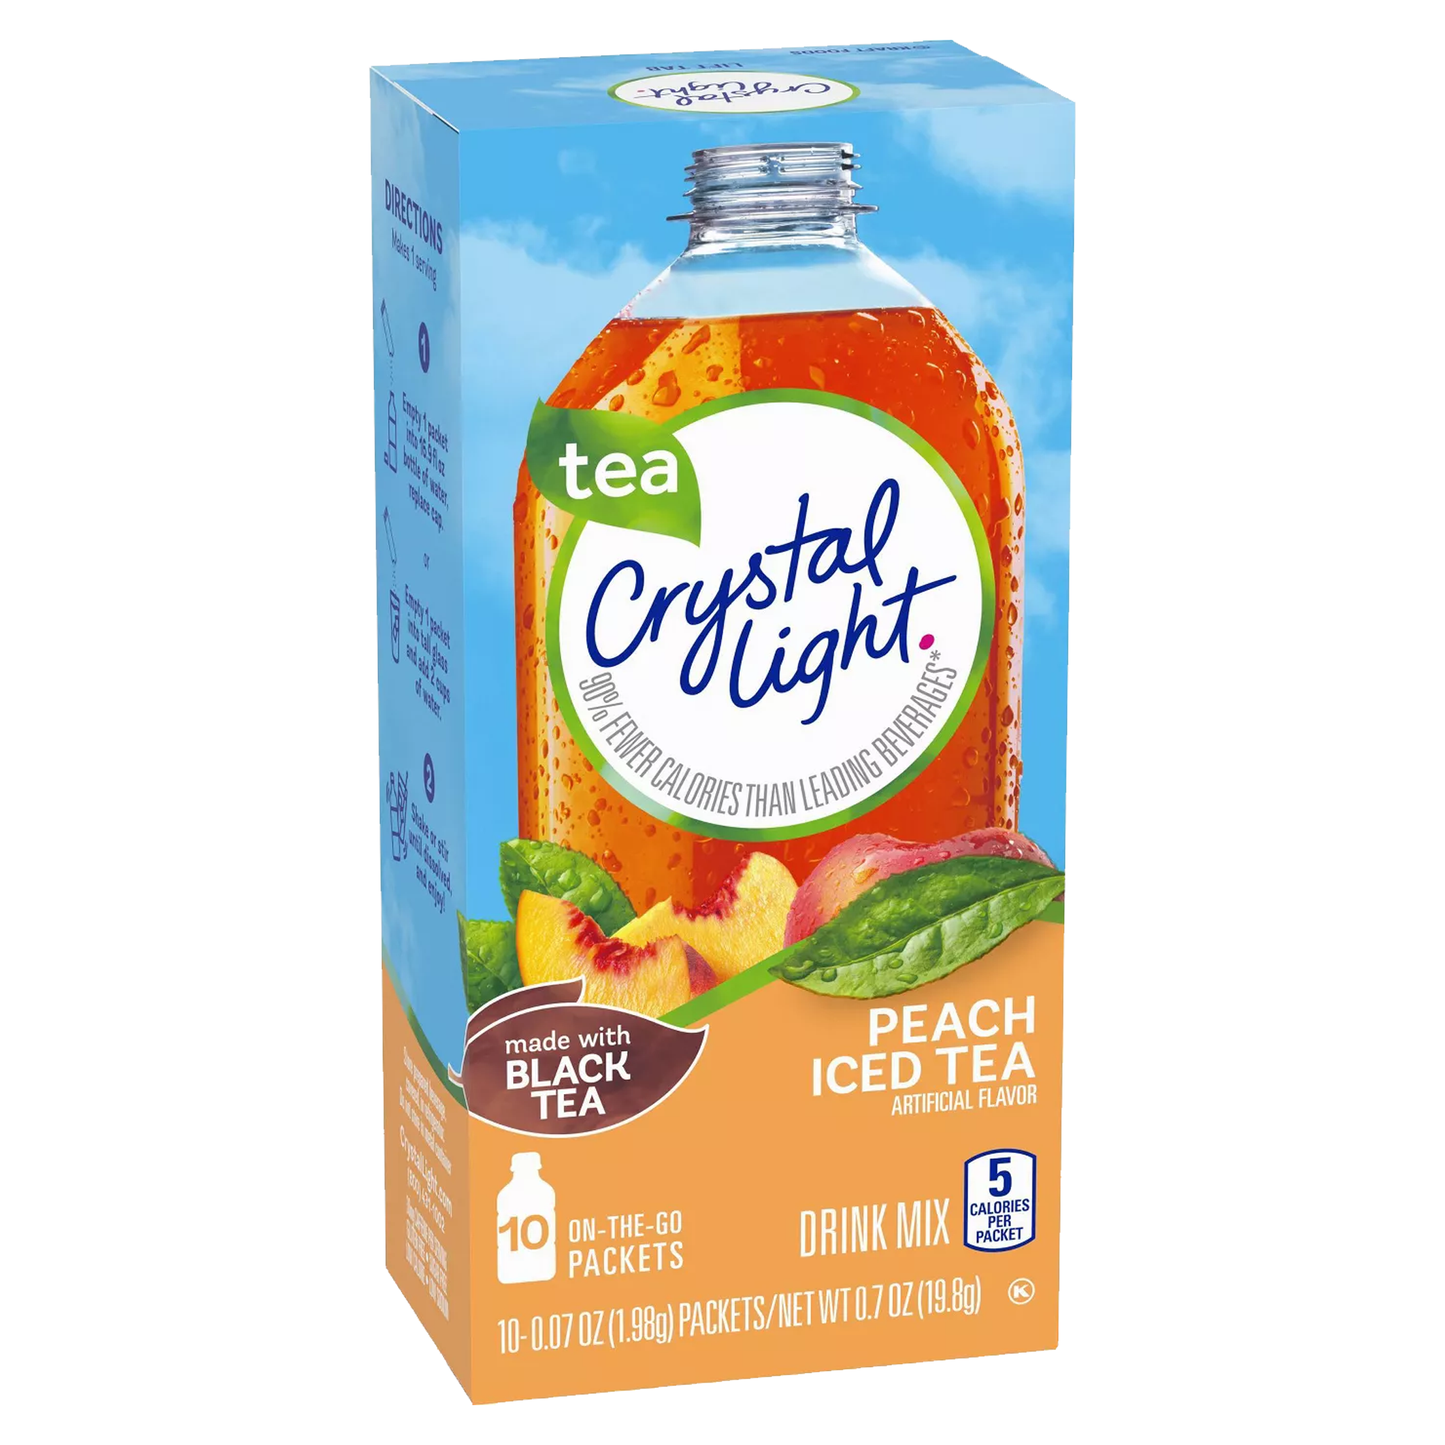 Crystal Light On The Go Peach Iced Tea Drink Mix 19.8g sold by American grocer Uk